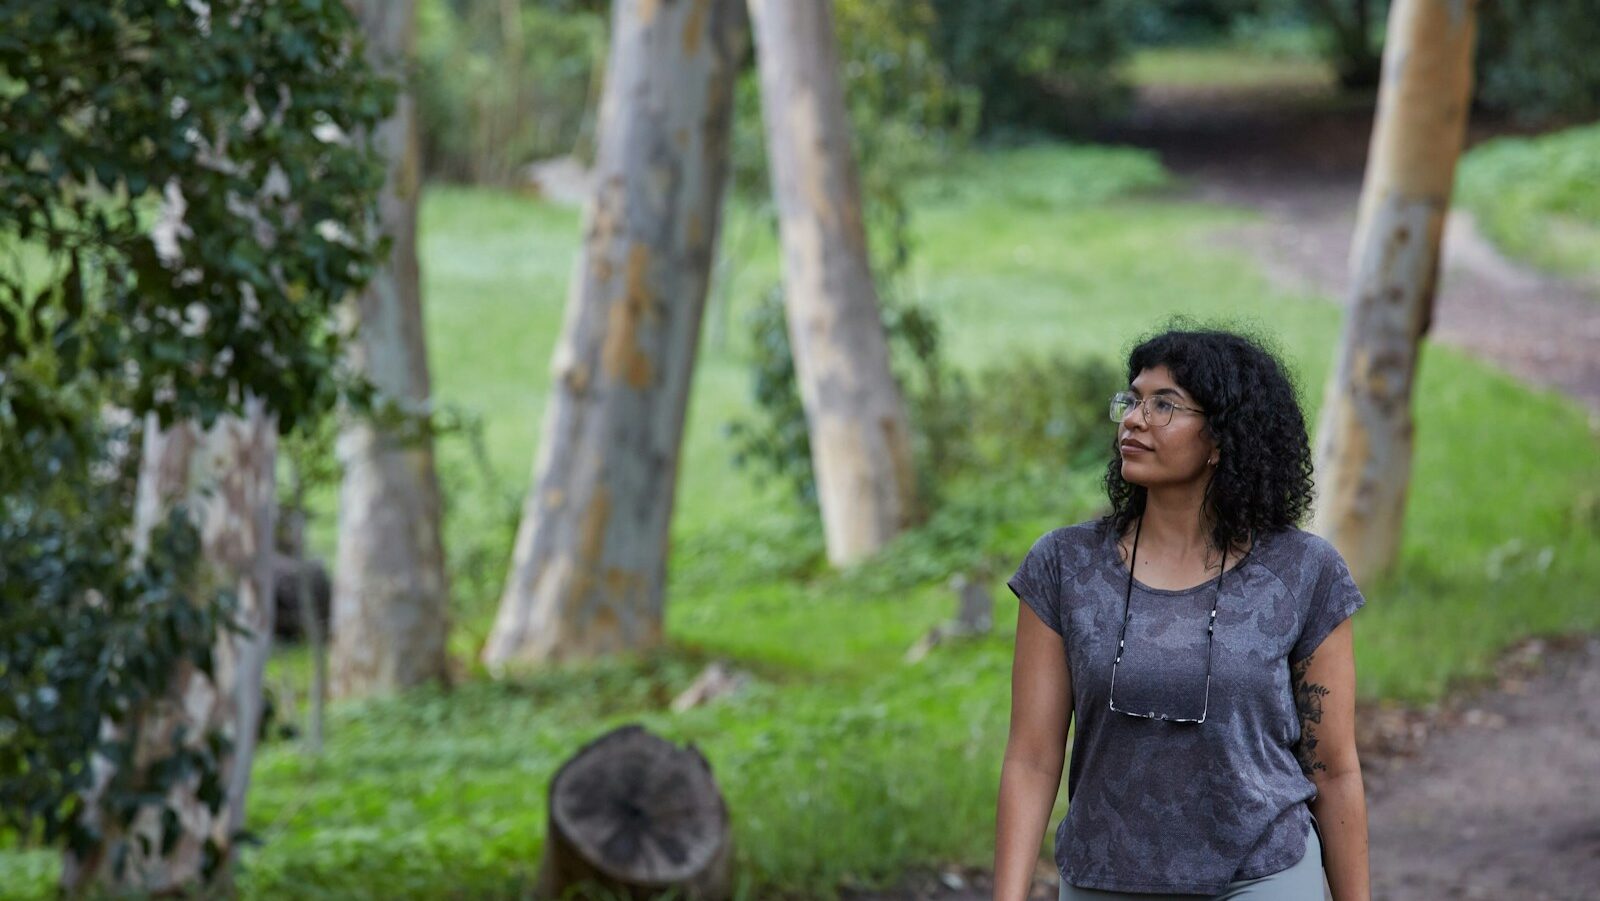 Ecological well-being describes the interconnected relationship between human and planetary health. The image depicts a woman with curly black hair walking and glasses, walking down a path in the woods